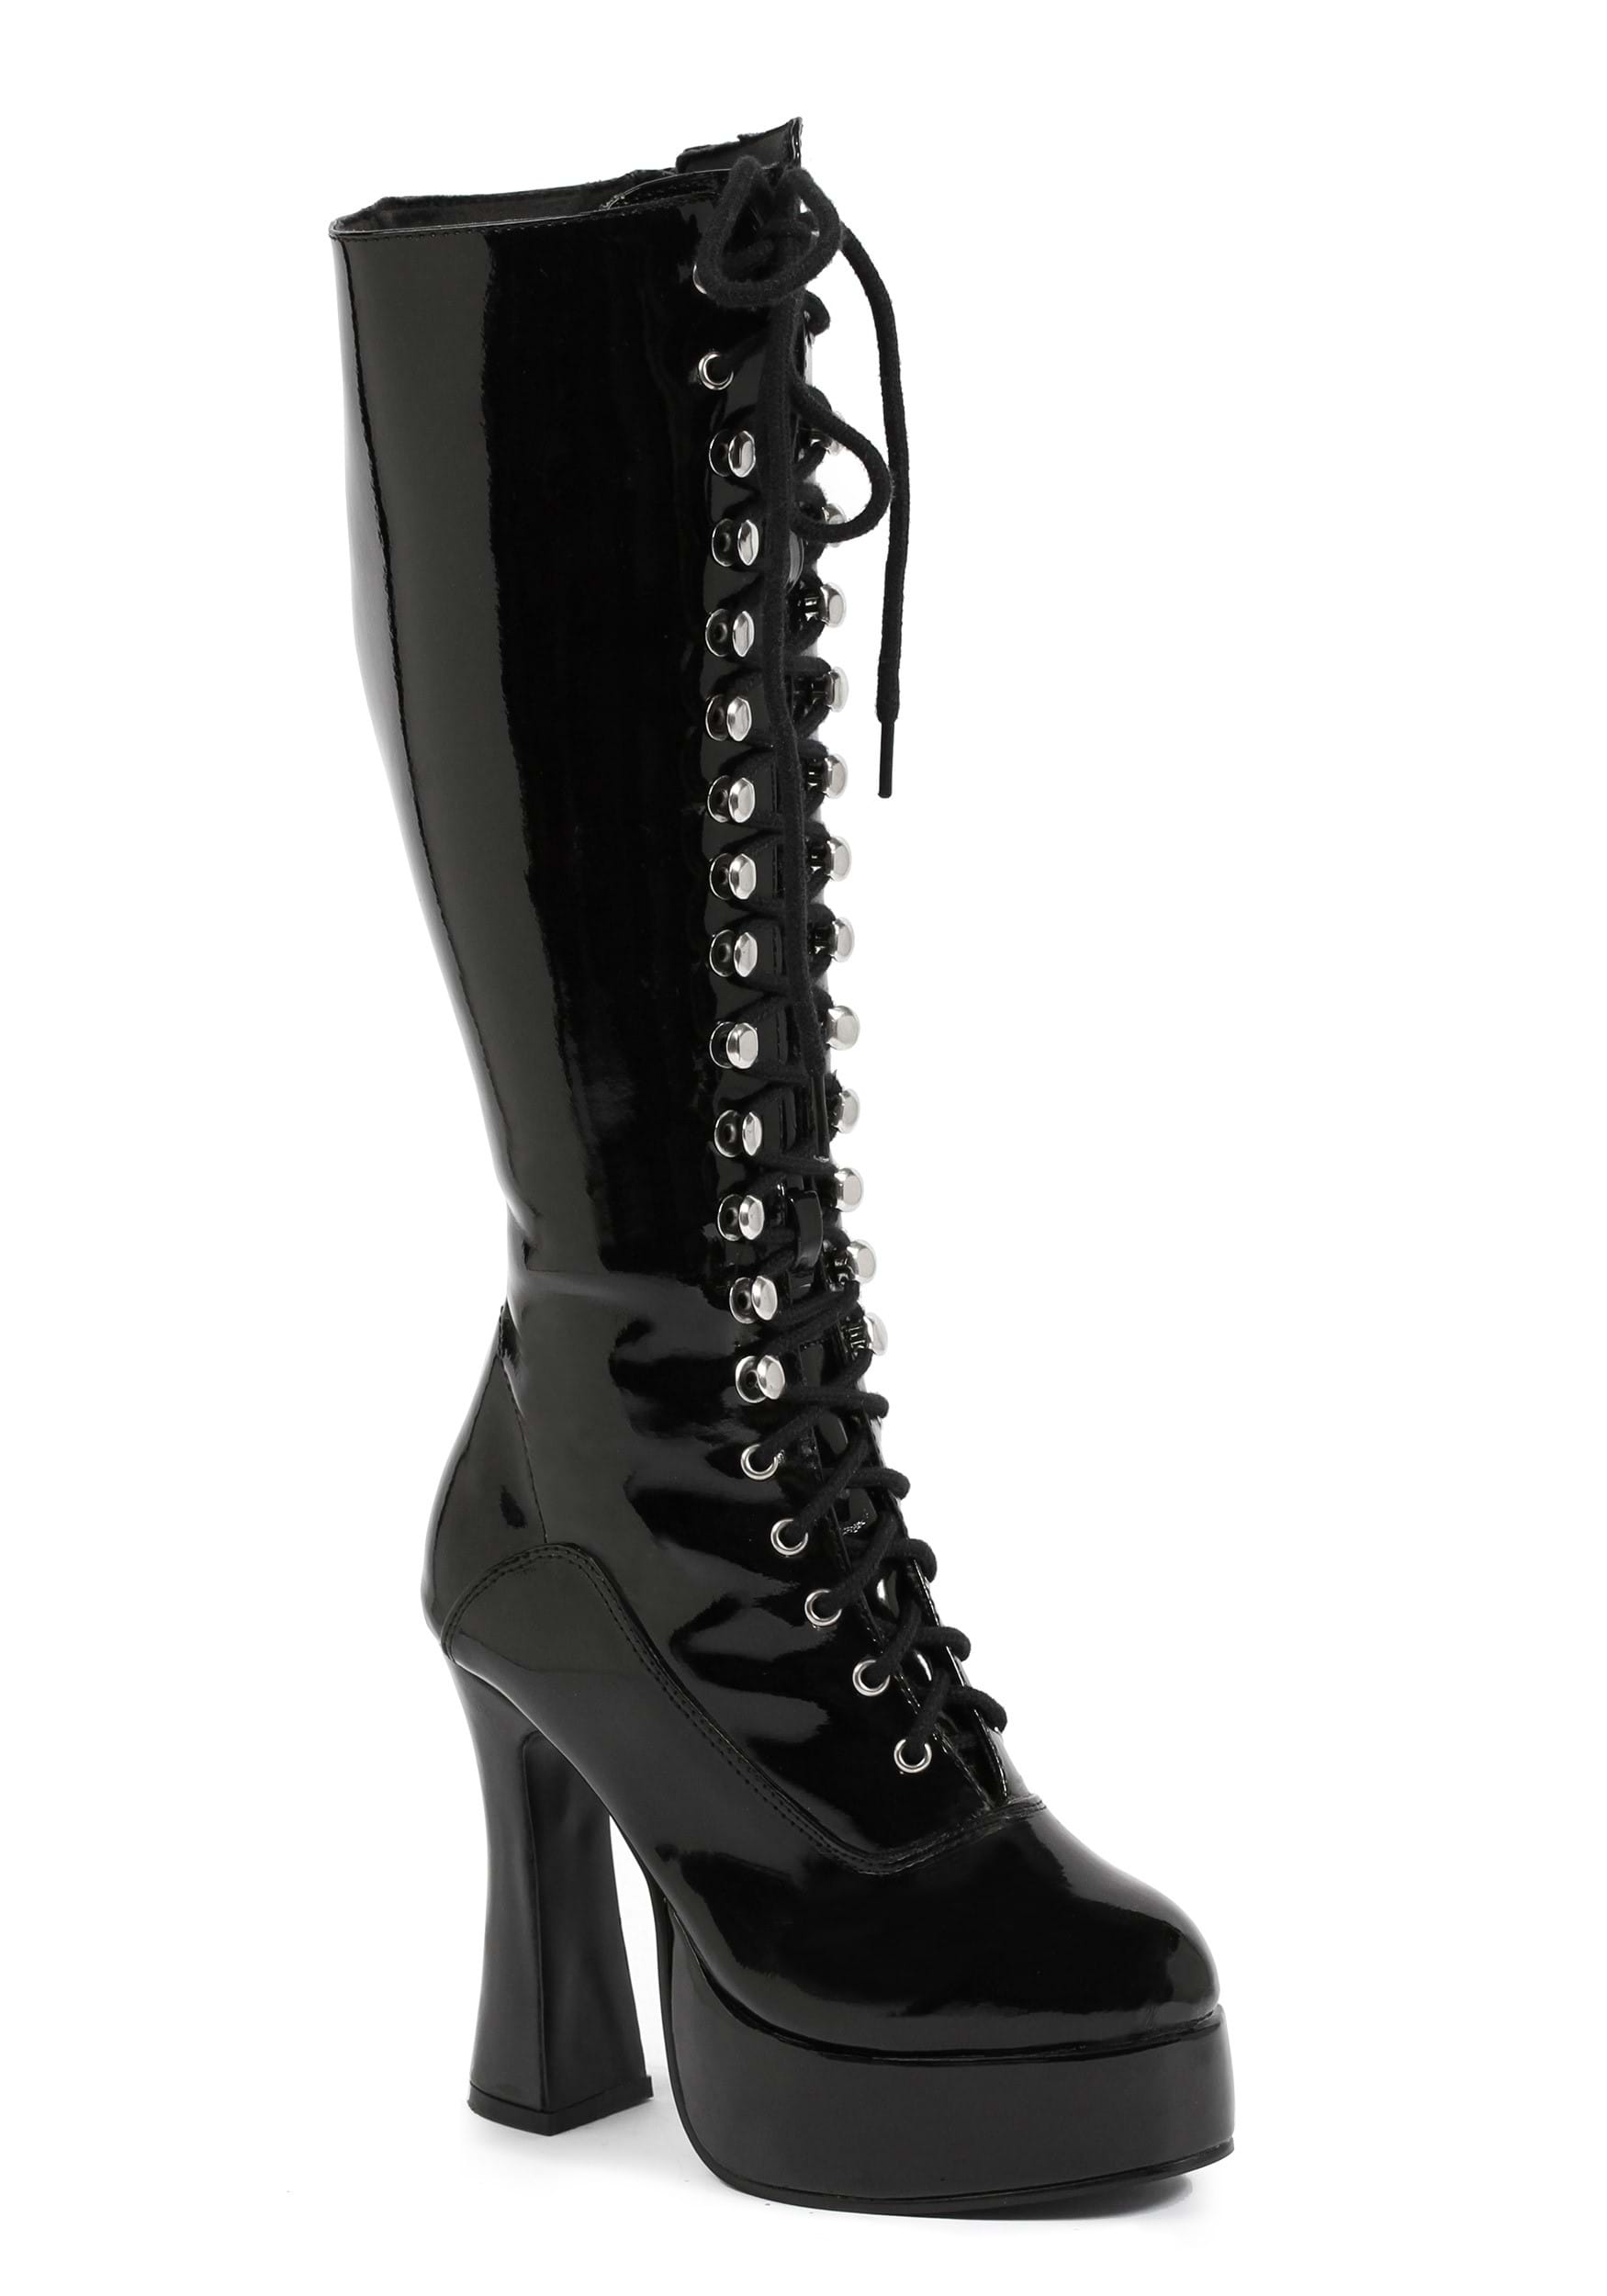 Image of Black Lace Knee High Women's Boots ID EEEASY-6